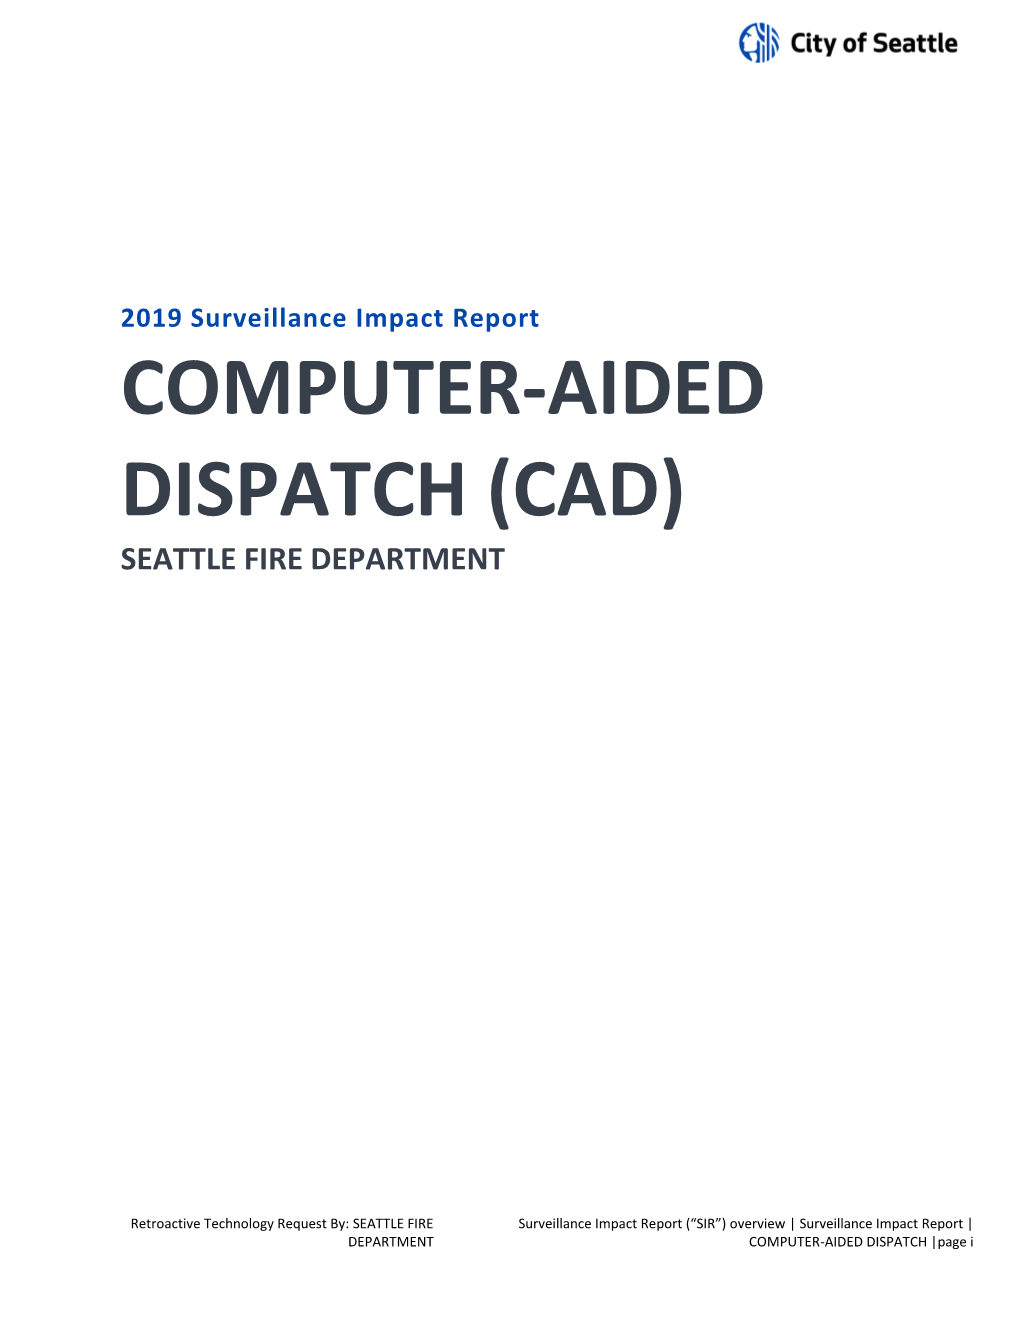 Computer-Aided Dispatch (Cad) Seattle Fire Department